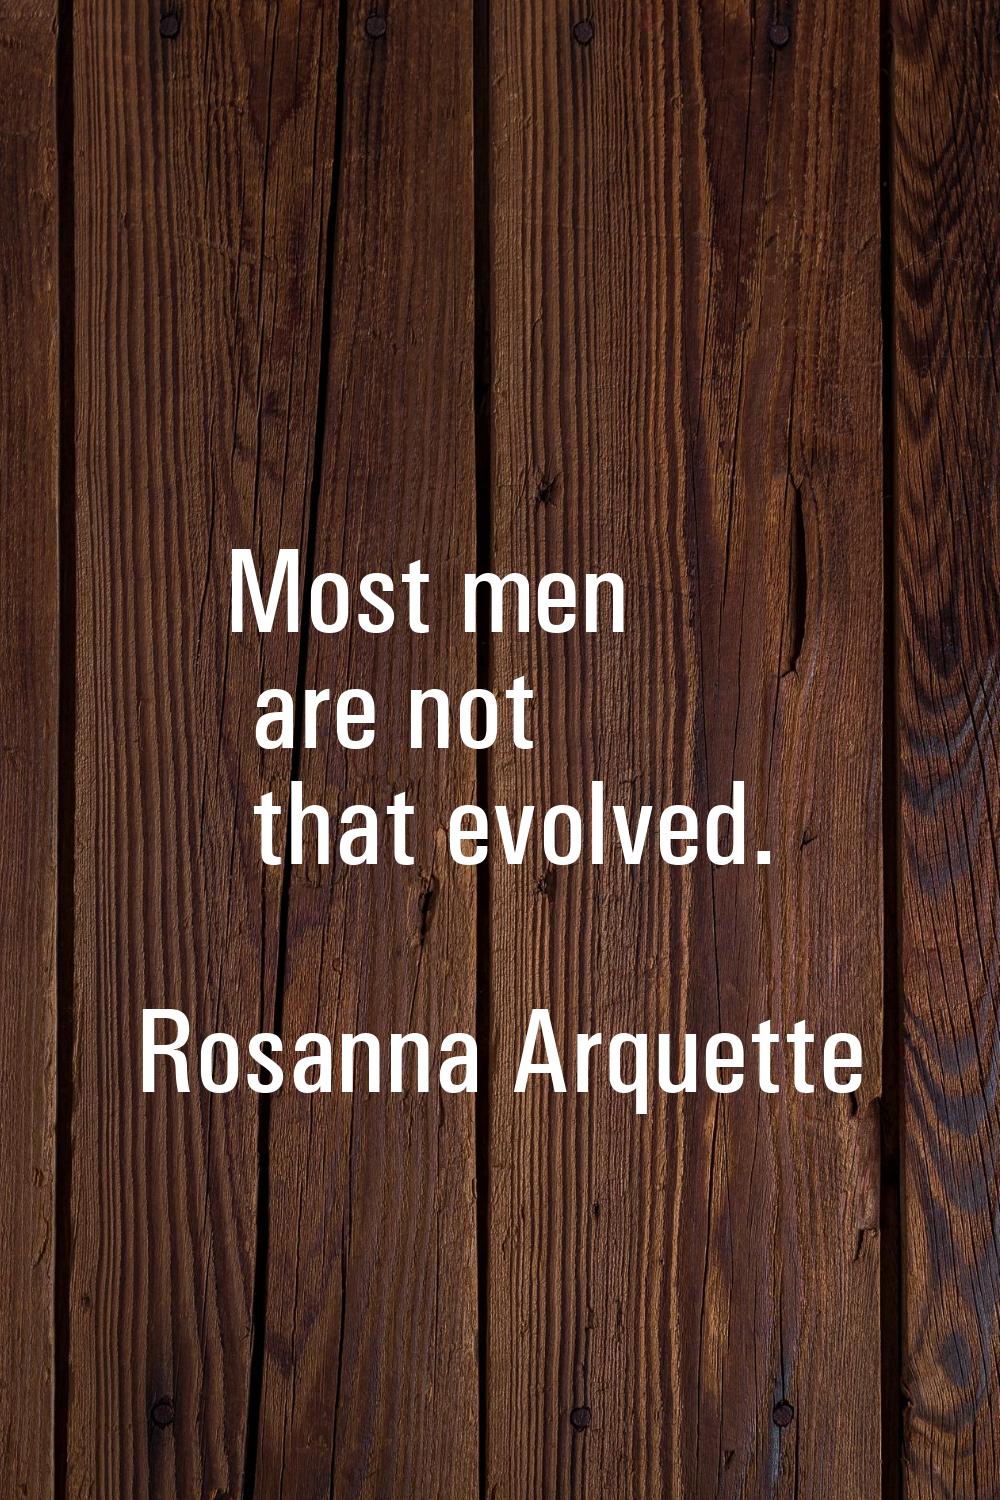 Most men are not that evolved.